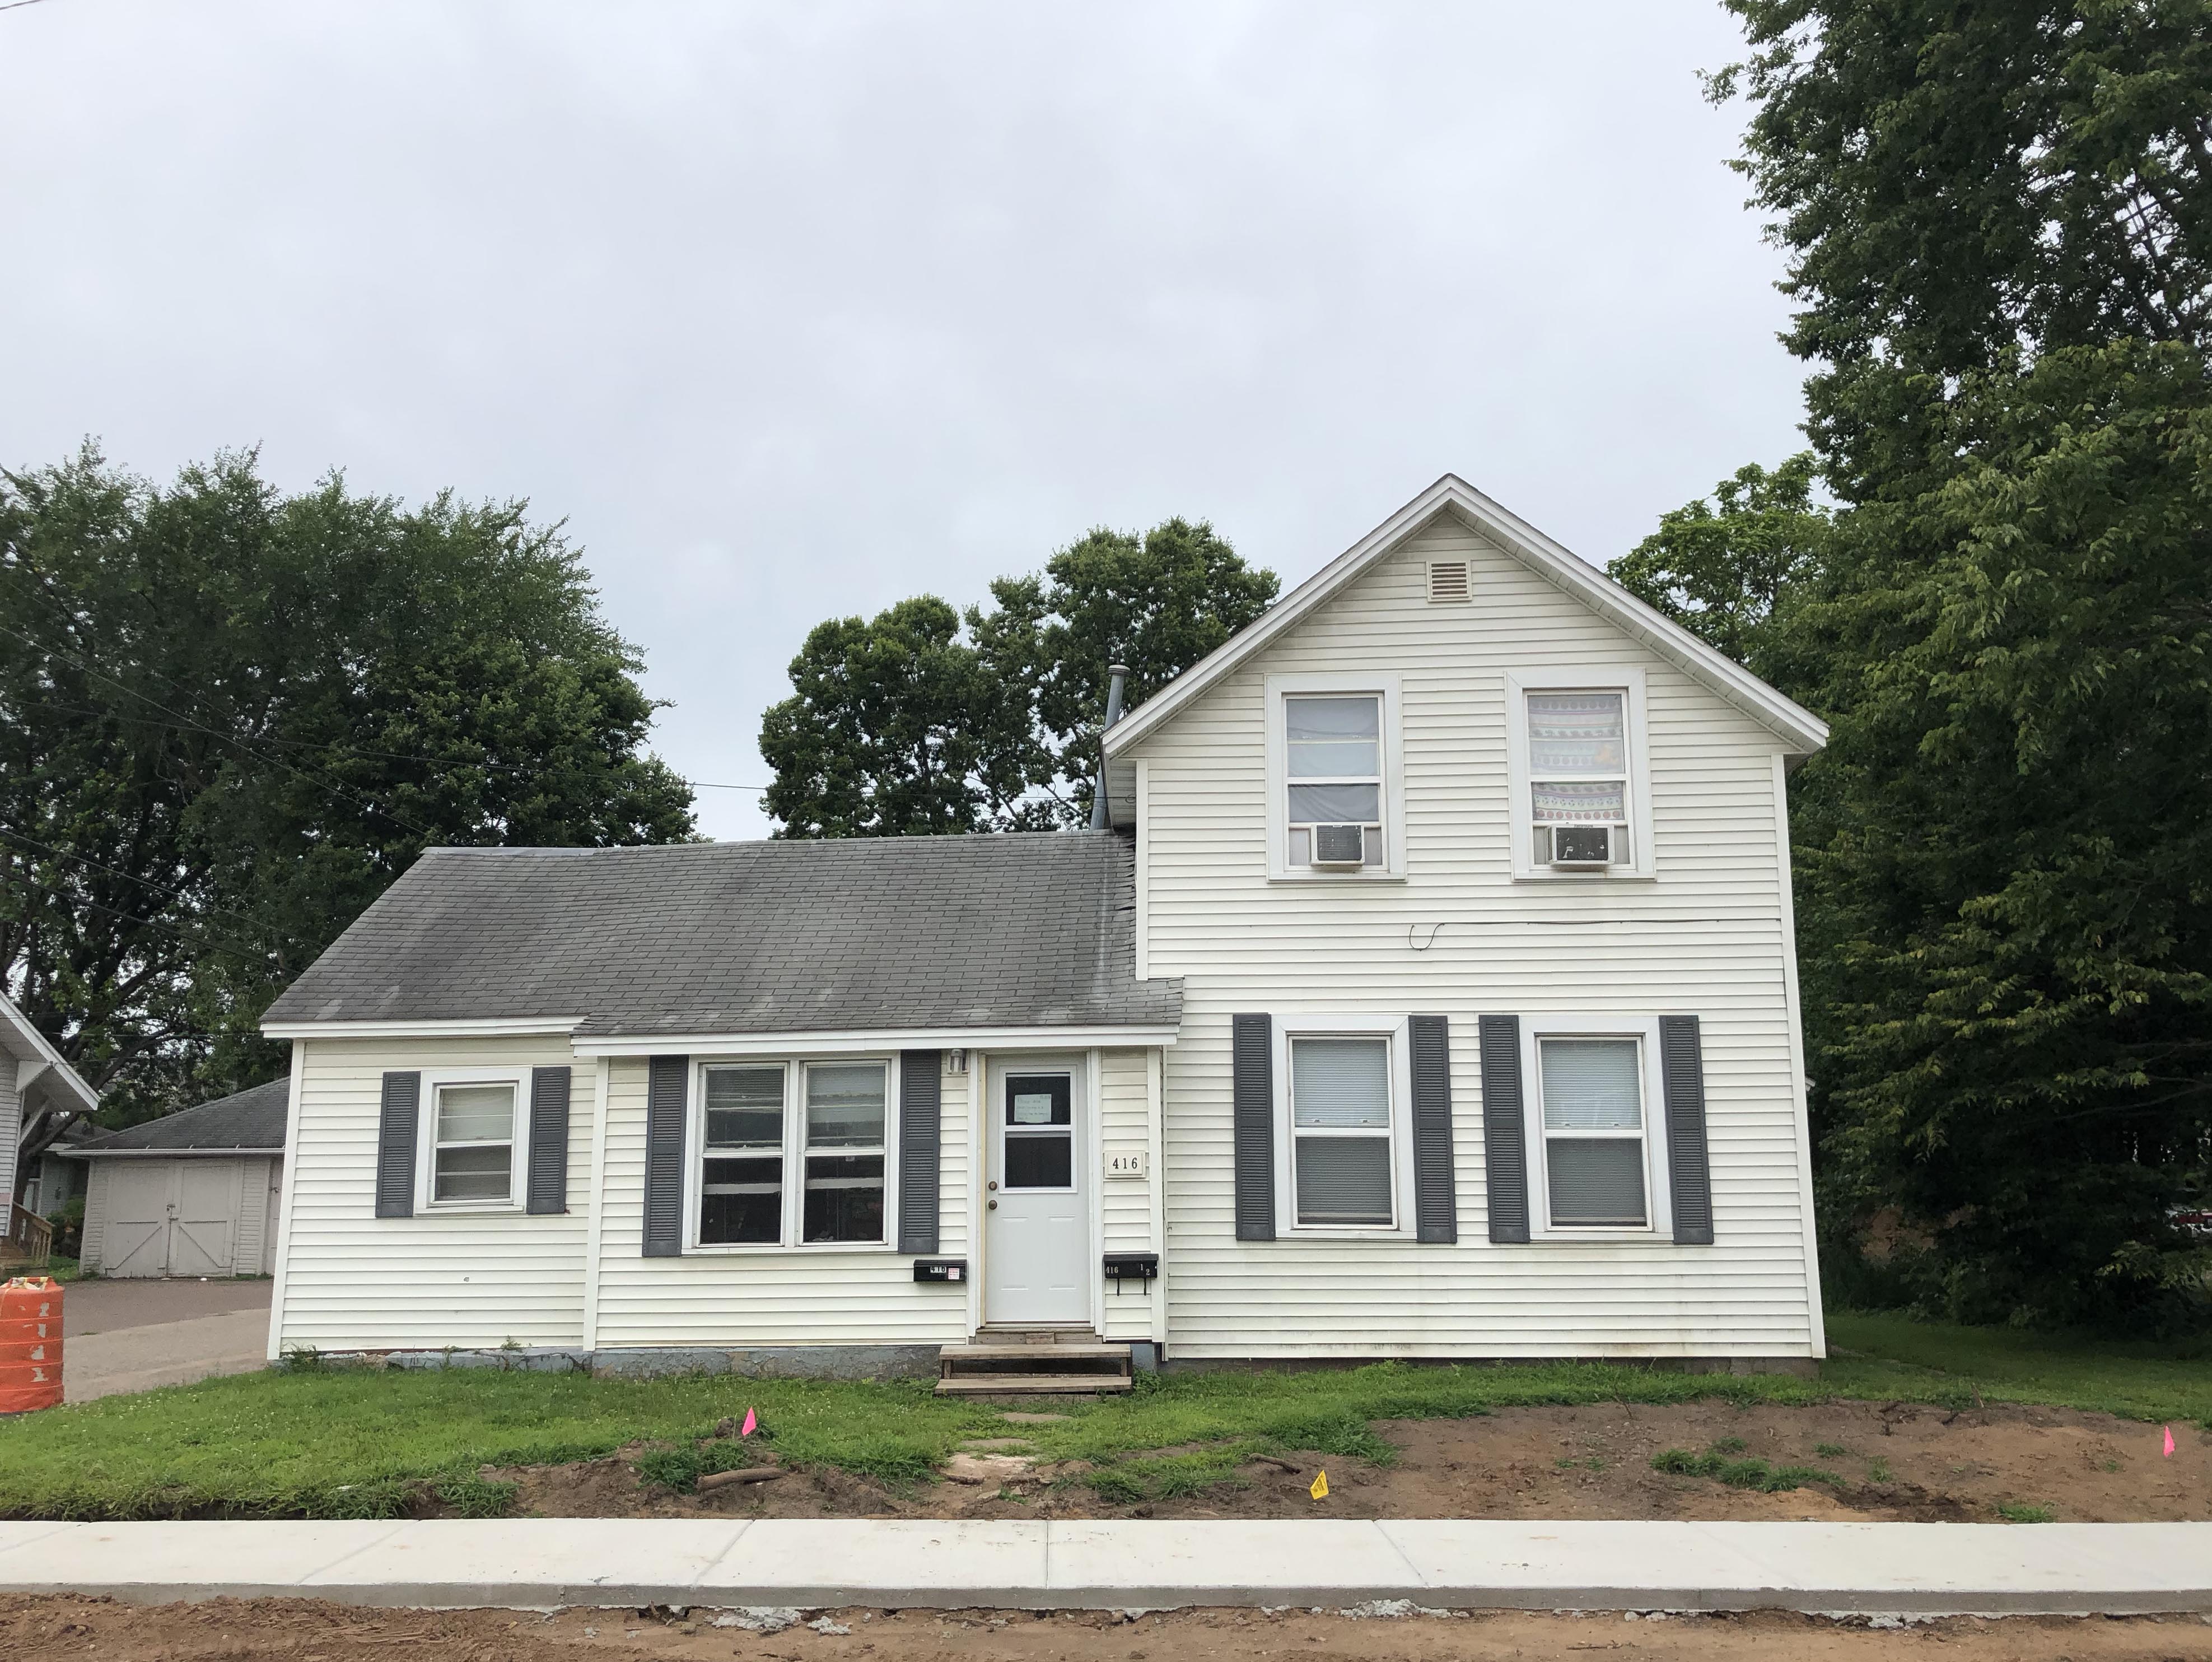 416 2nd Ave, Eau Claire, Wisconsin 54703, 1 Bedroom Bedrooms, ,1 BathroomBathrooms,Multi-Family,Apartment,416 2nd Ave,1061